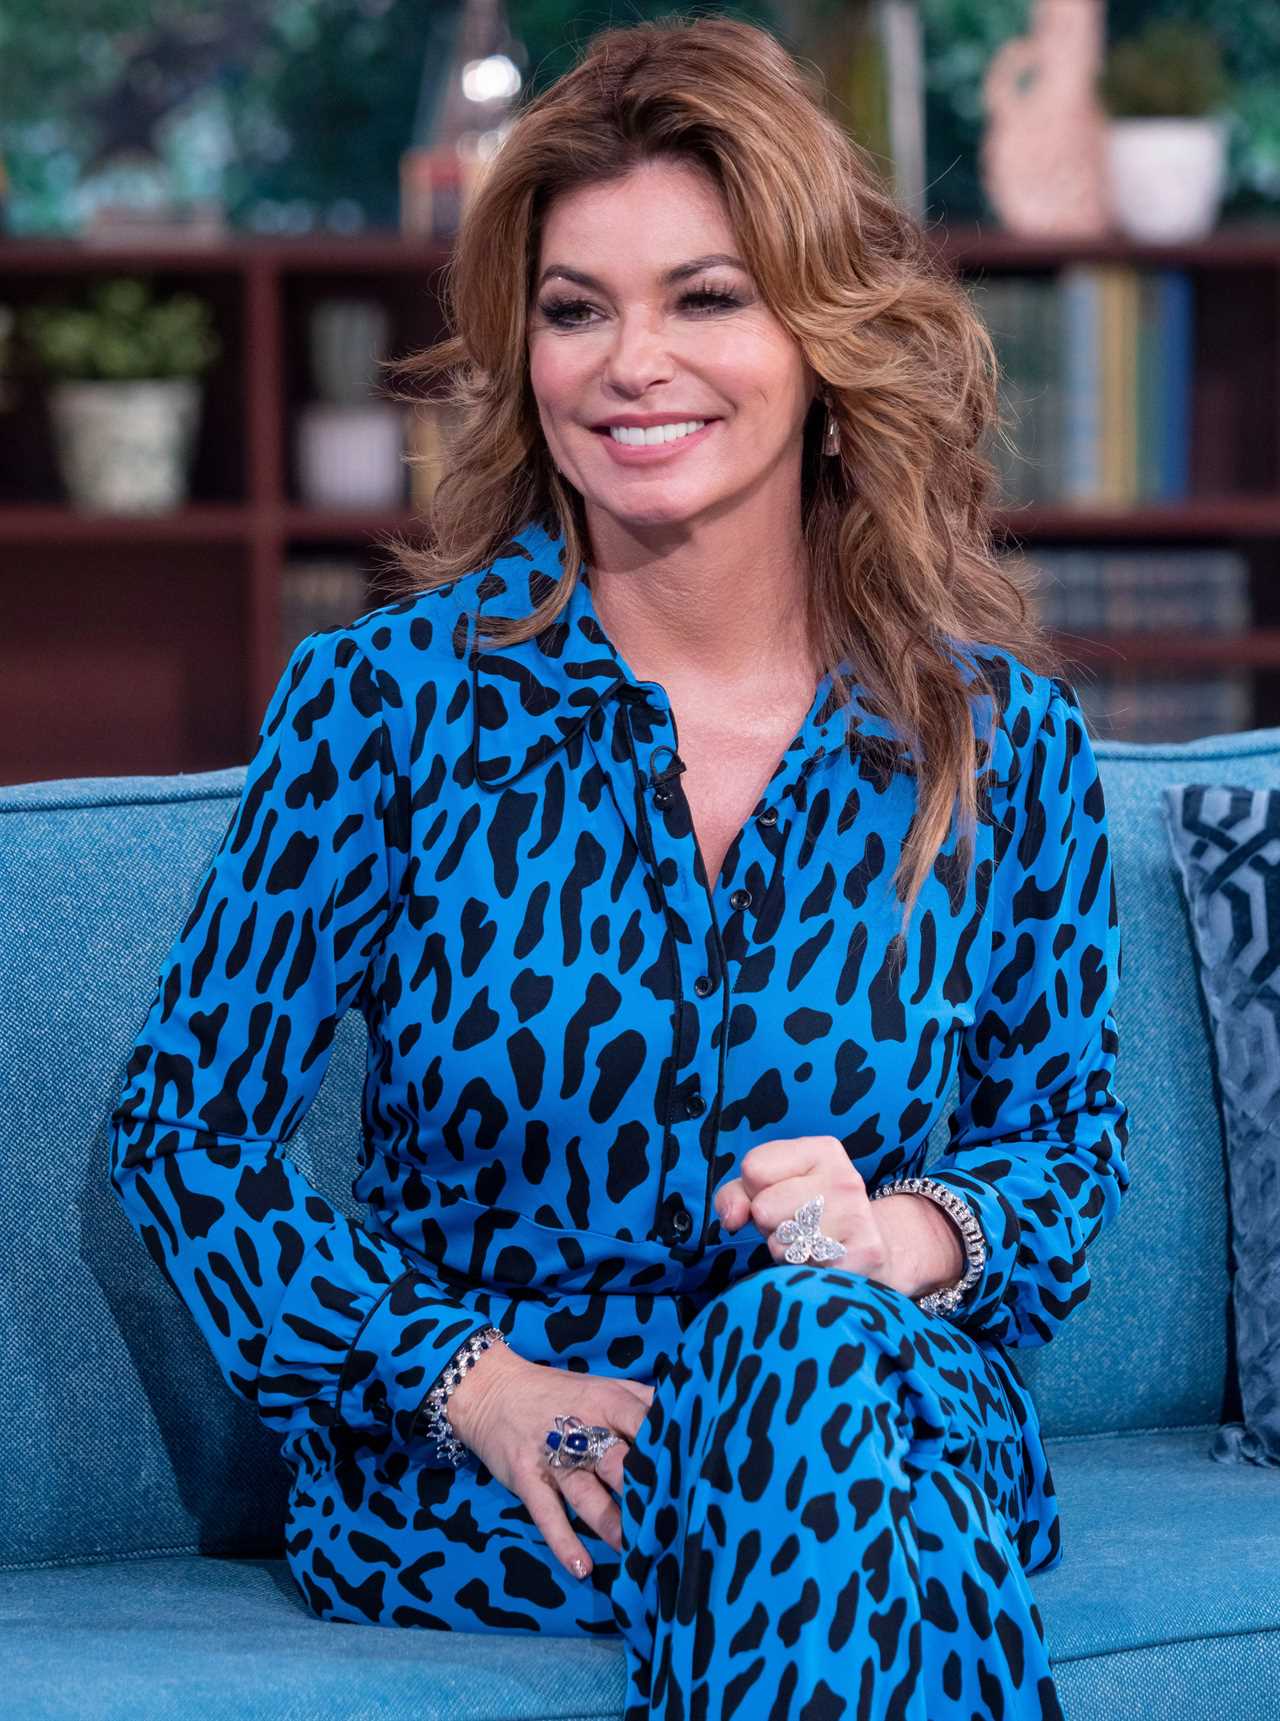 This Morning fans gobsmacked as they discover Shania Twain’s real age